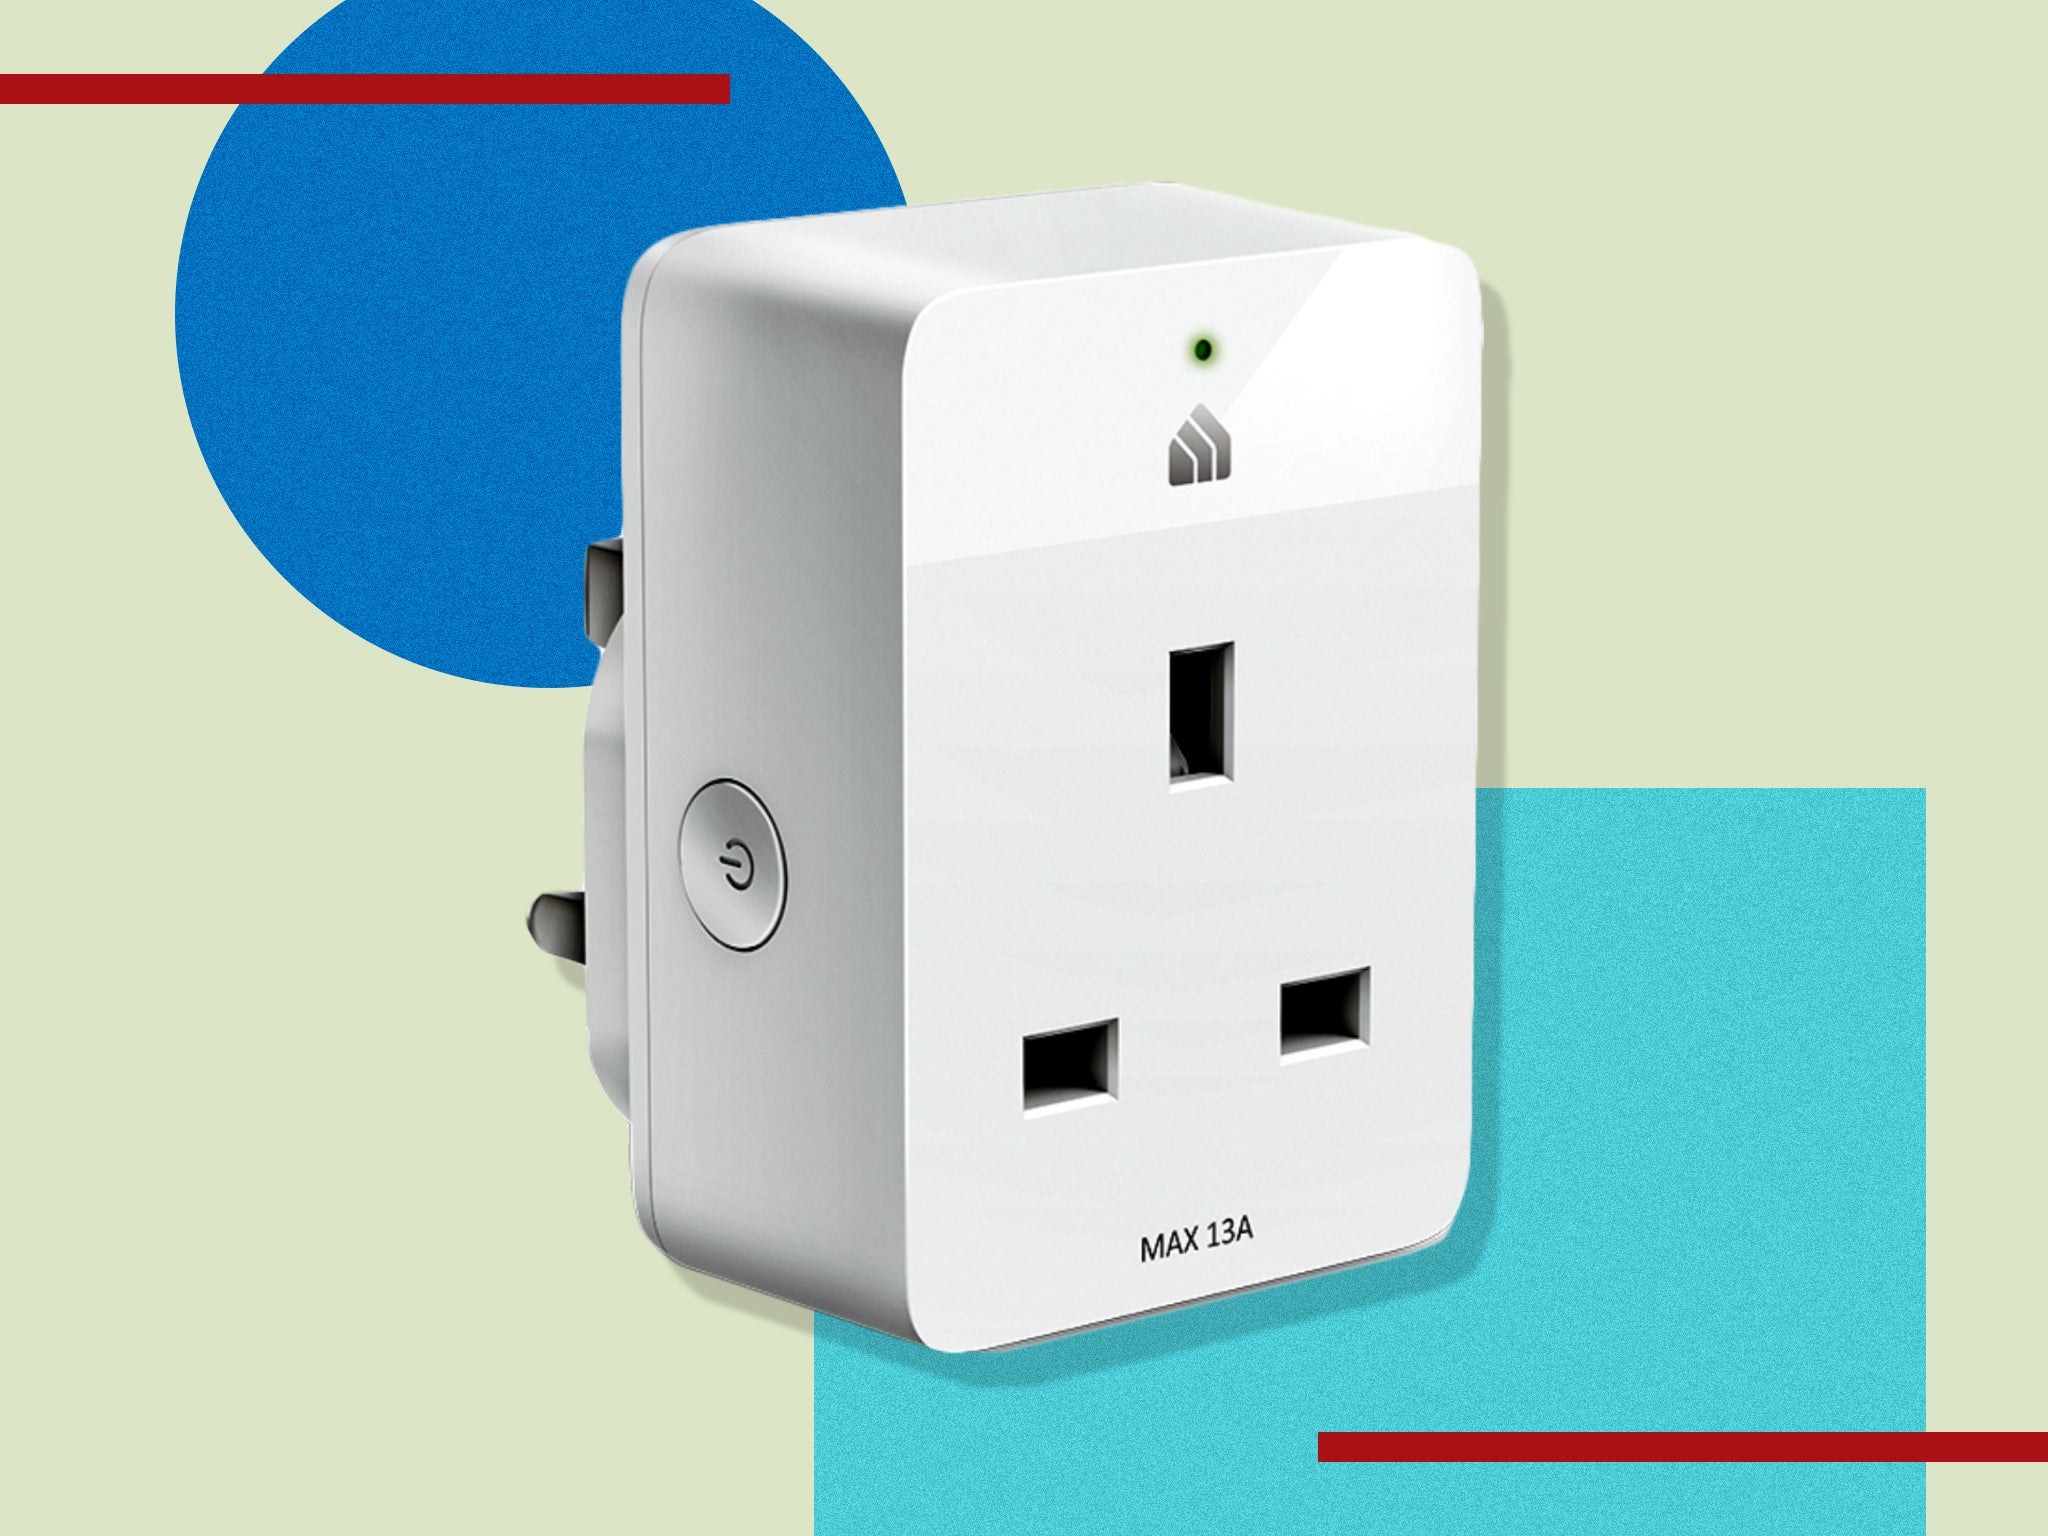 The plug connects to your wifi and grants smartphone or voice control to anything you attach to it